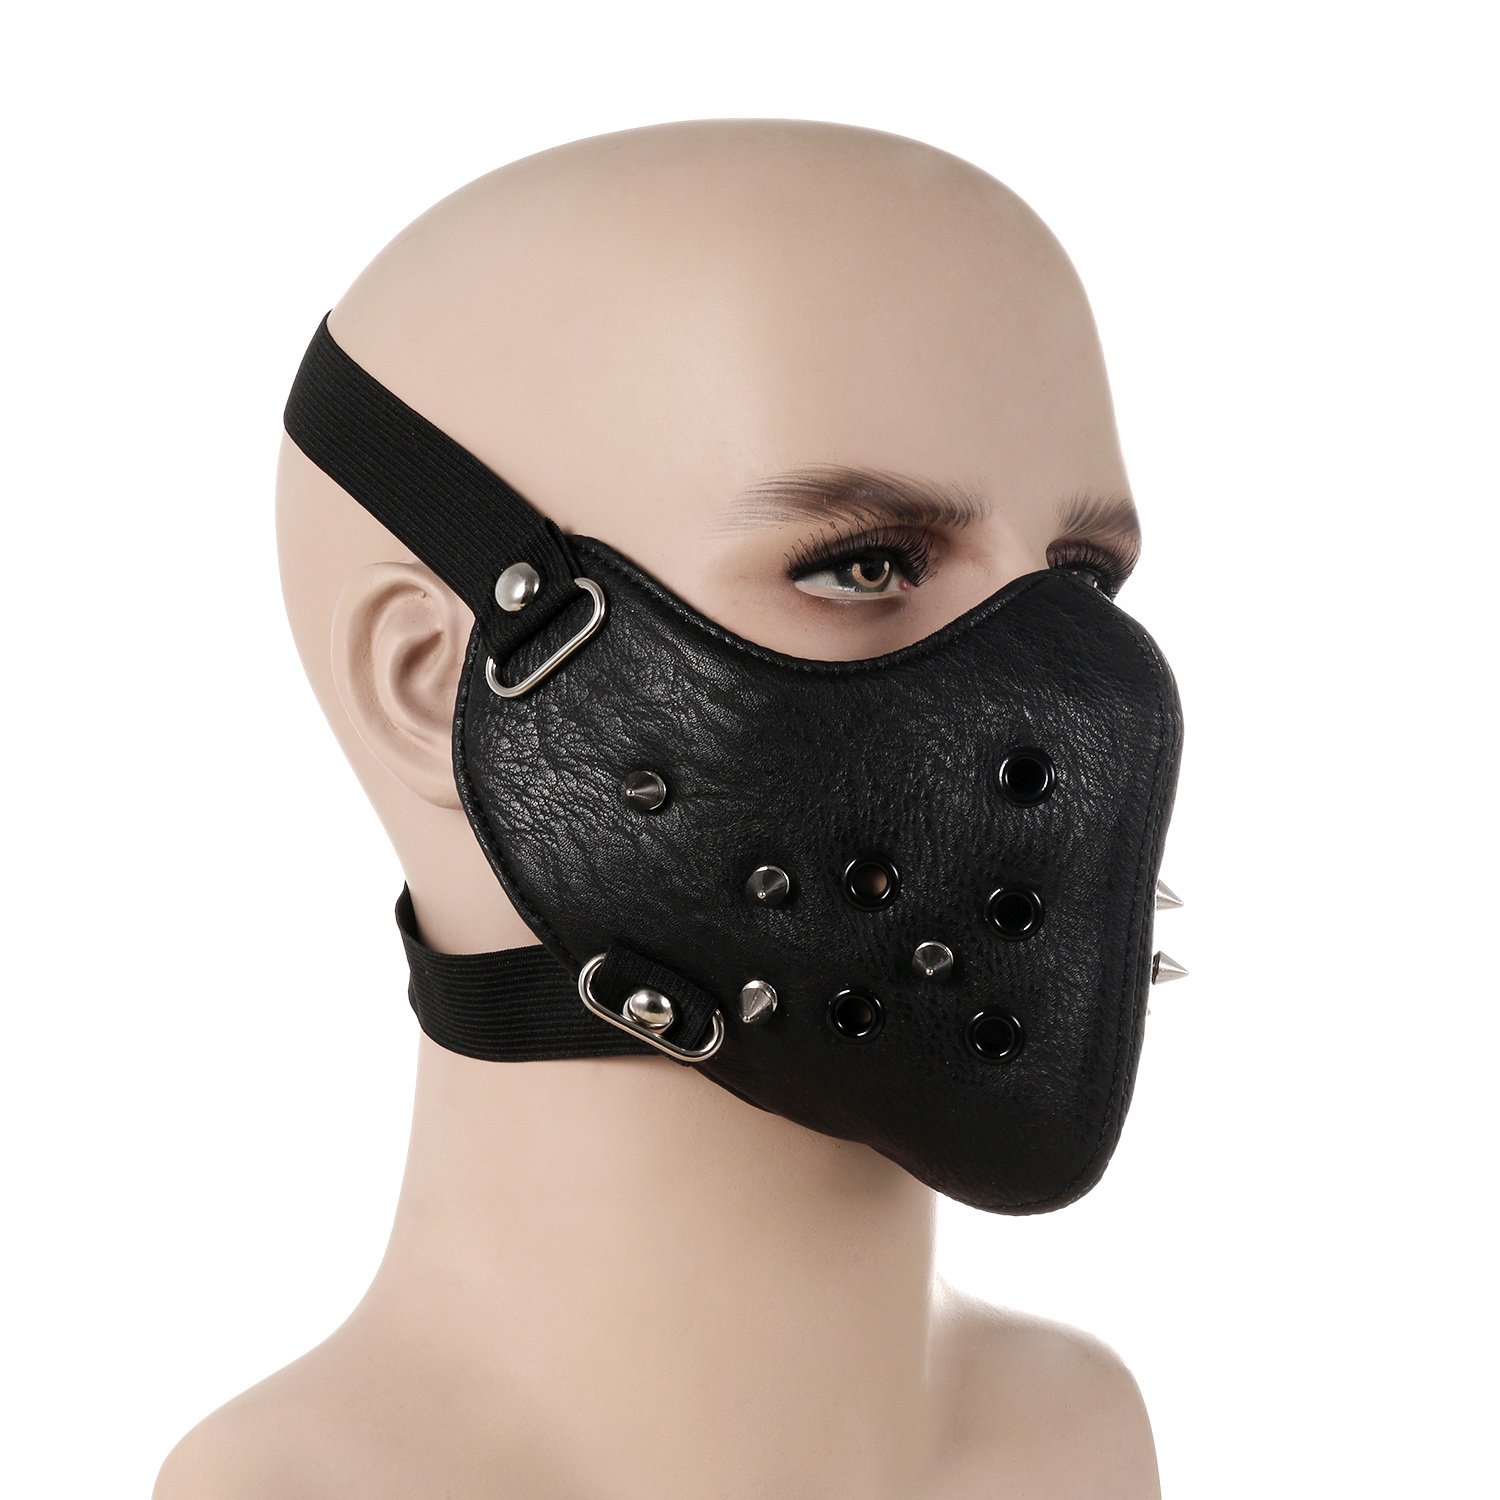 TSWRK Punk Faux Leather Mask, Wind Protector Motorcycle Biker Half Face Mask, Anti-Dust Sport Mask Halloween Costume